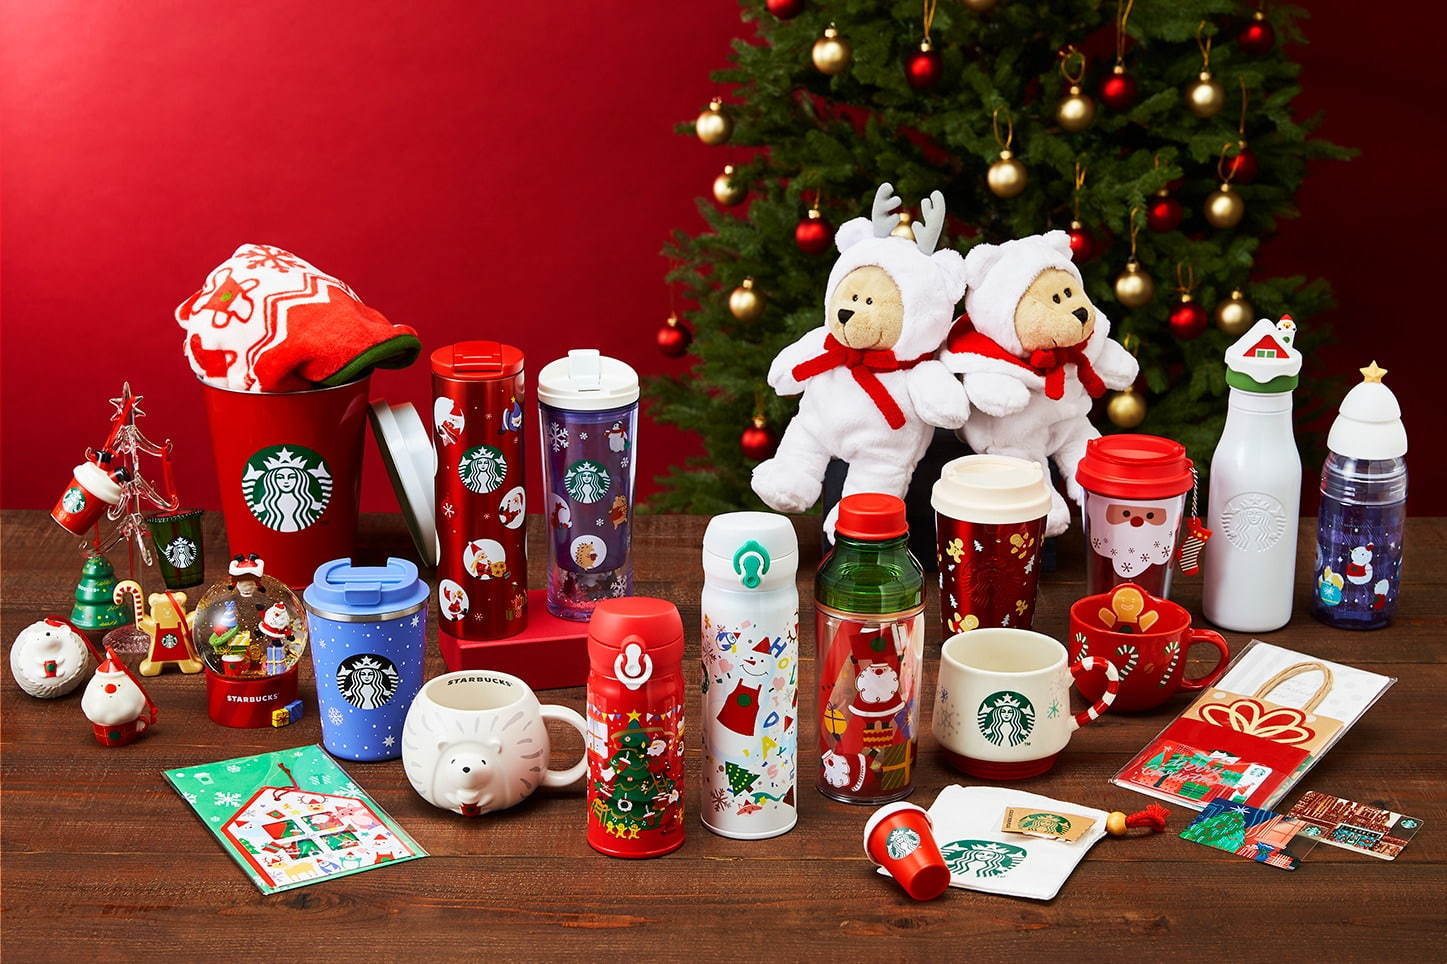 Starbucks Japan Releases New Limited Edition Mugs, Cards And Travel Bottles For Christmas 2019. SoraNews24 Japan News